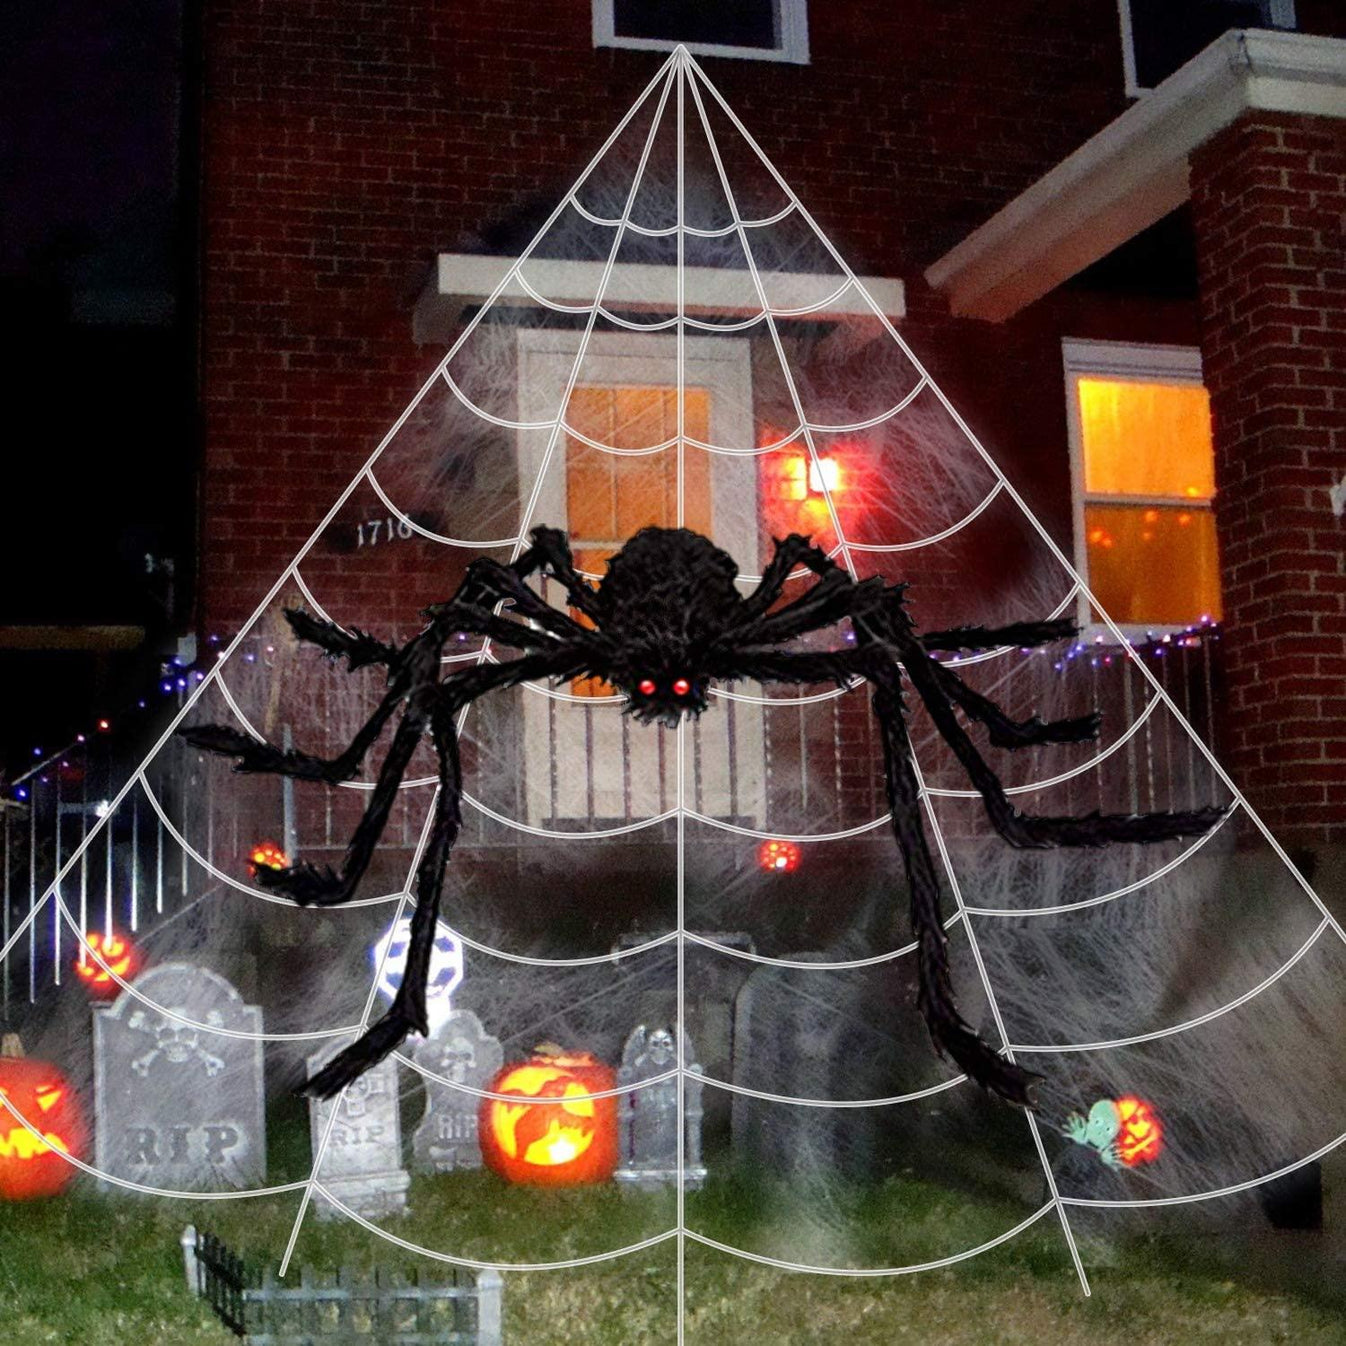 Outdoor Halloween Decorations - Scary Spider Decorations Set Comes wit ...